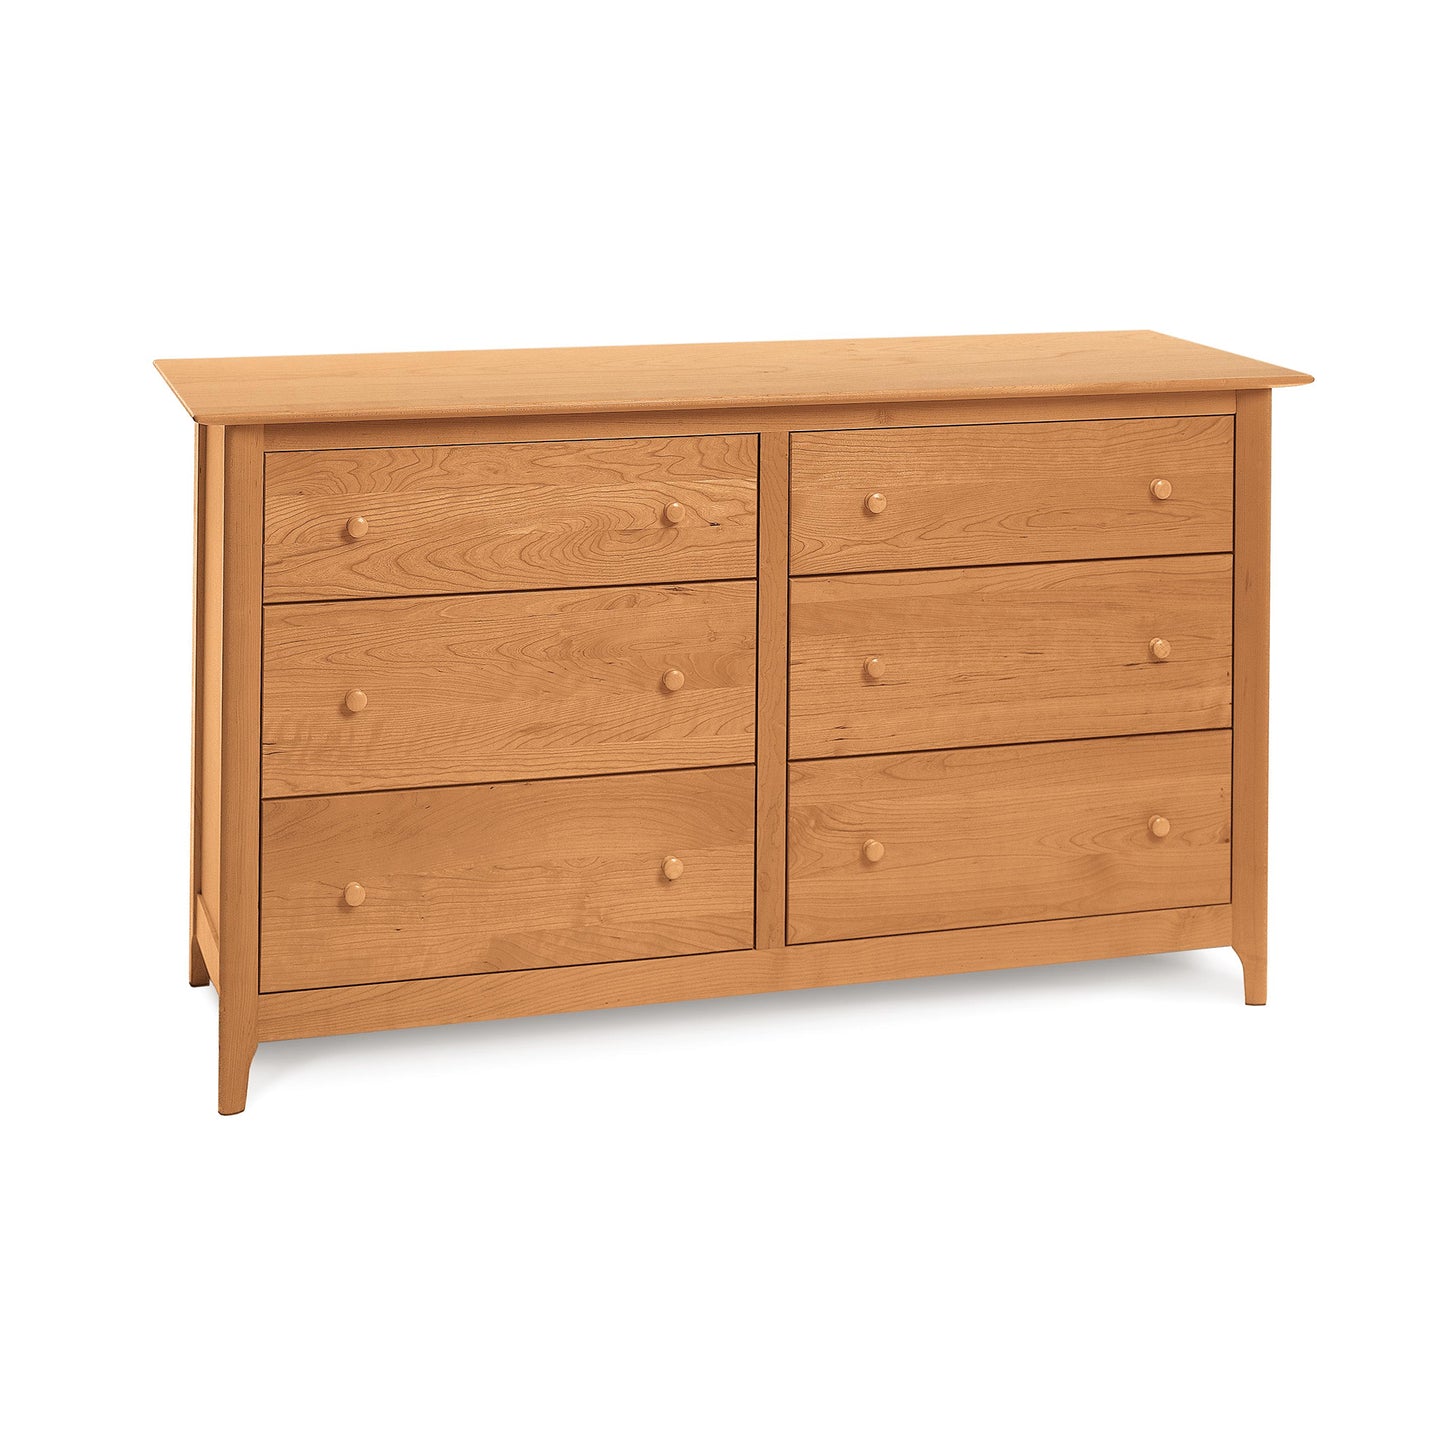 A natural cherry wood Sarah 6-Drawer Dresser by Copeland Furniture against a white background.